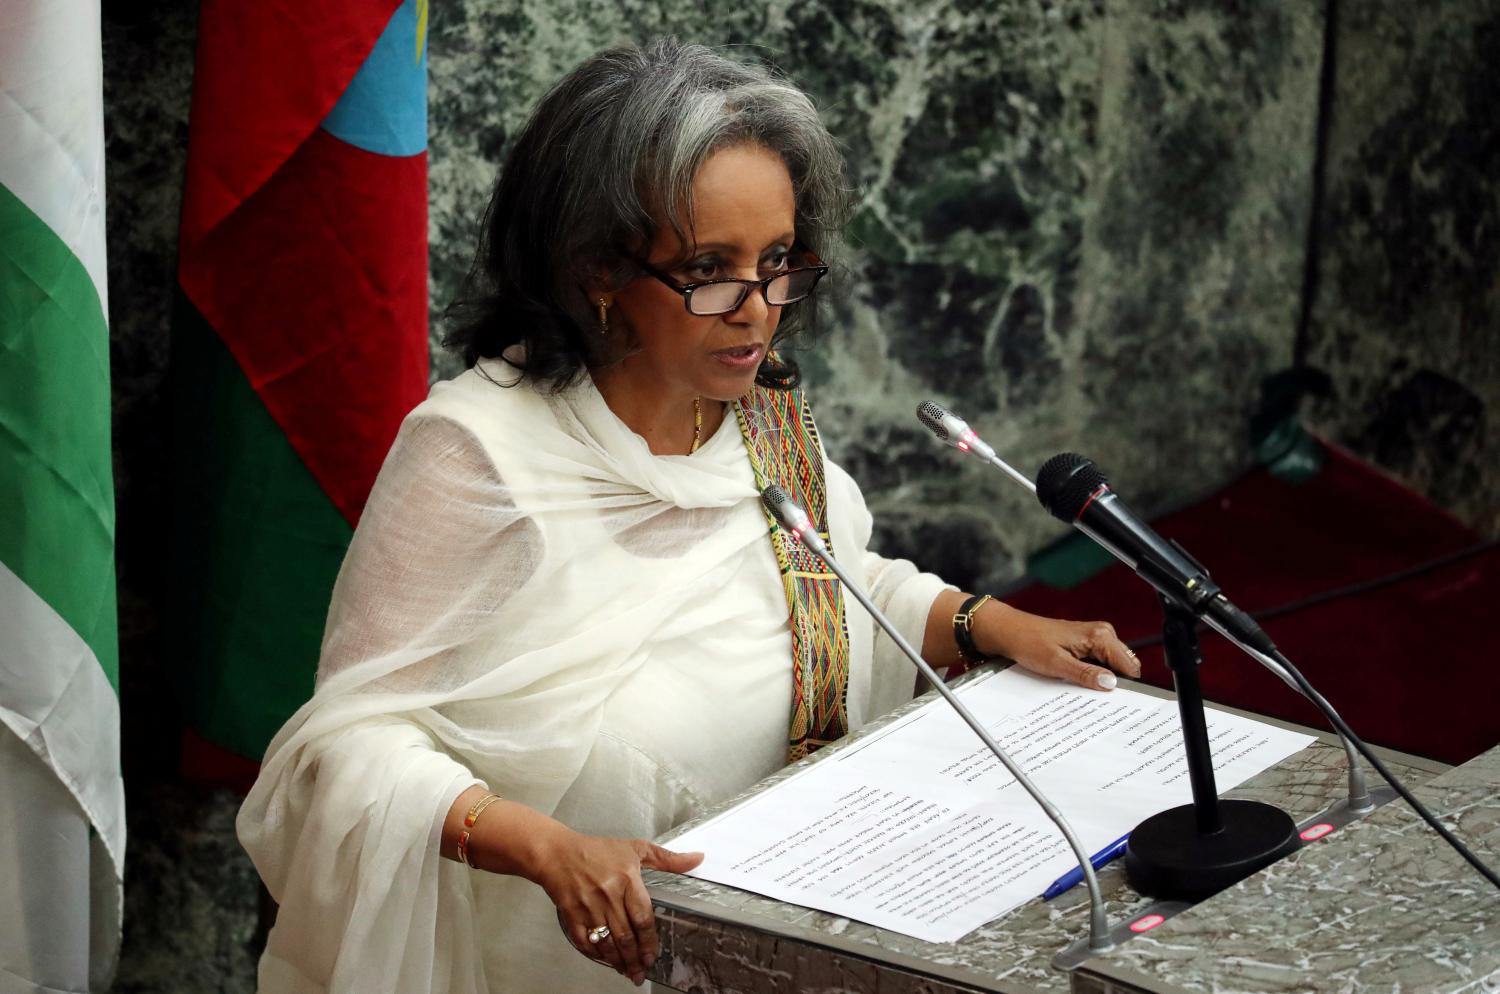 Newly elected President Sahle-Work Zewde addresses the House of Peoples' Representatives in Addis Ababa, Ethiopia October 25, 2018. REUTERS/Tiksa Negeri - RC121F910040